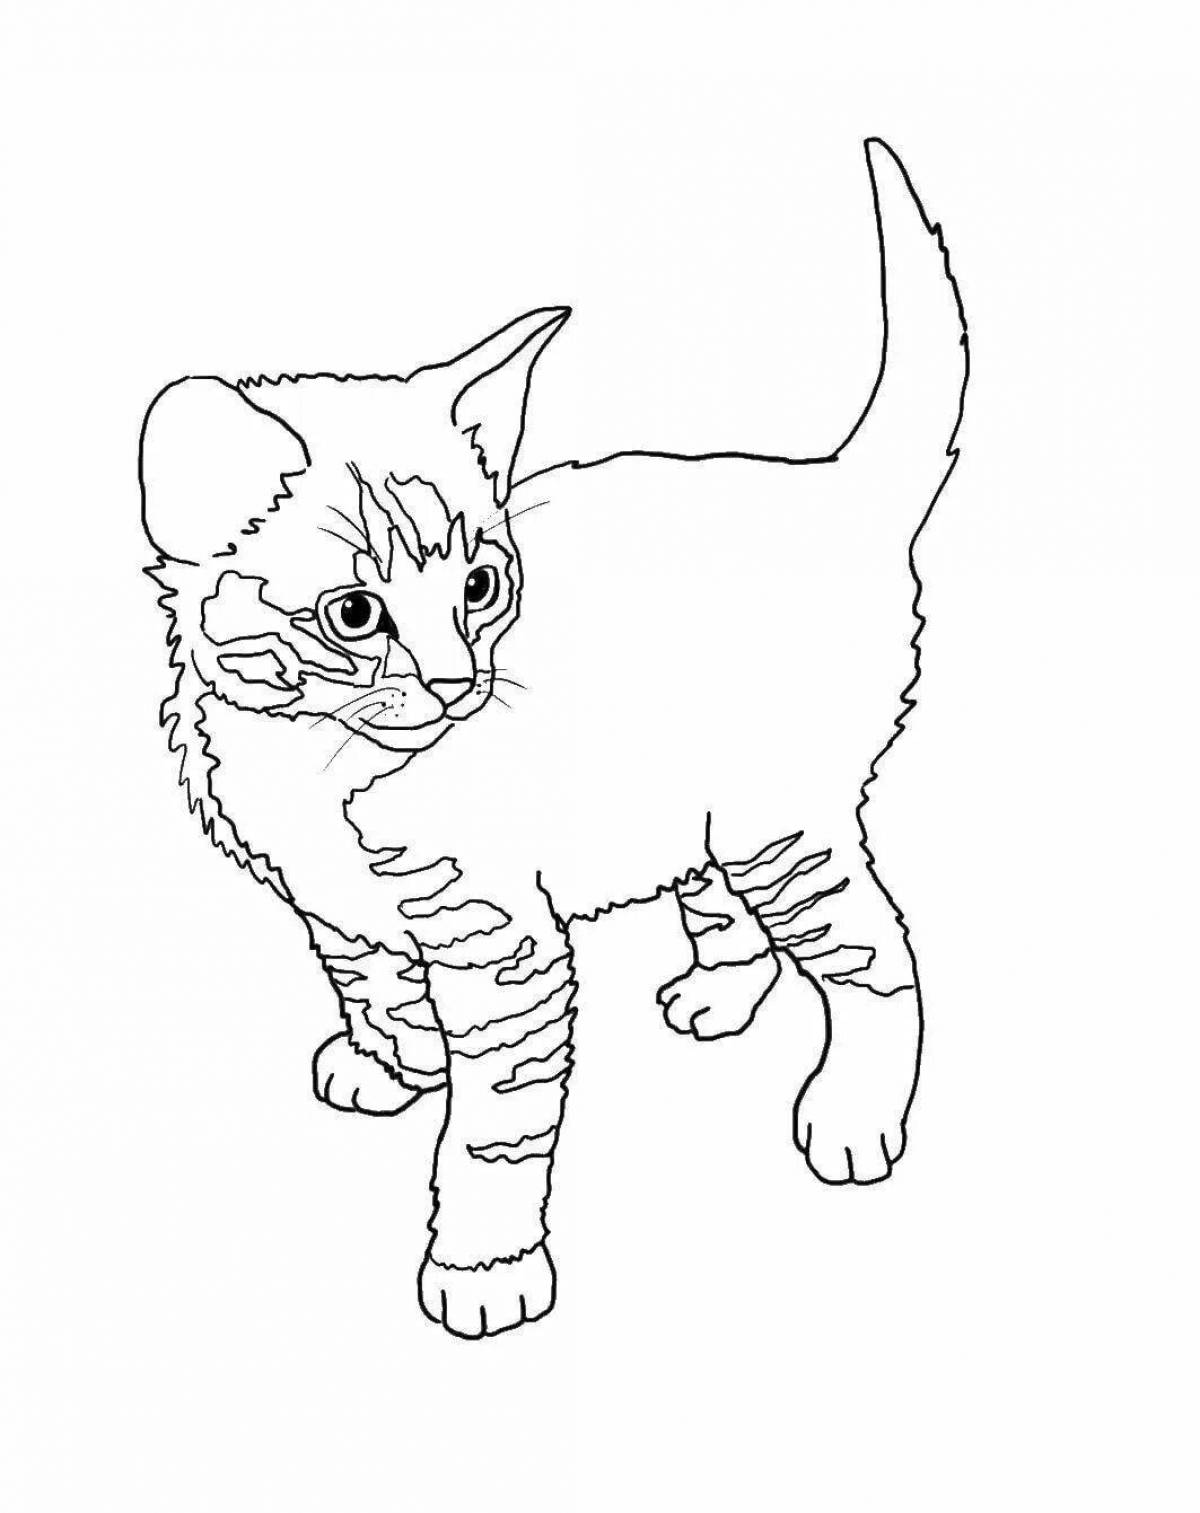 Charming all cats coloring book